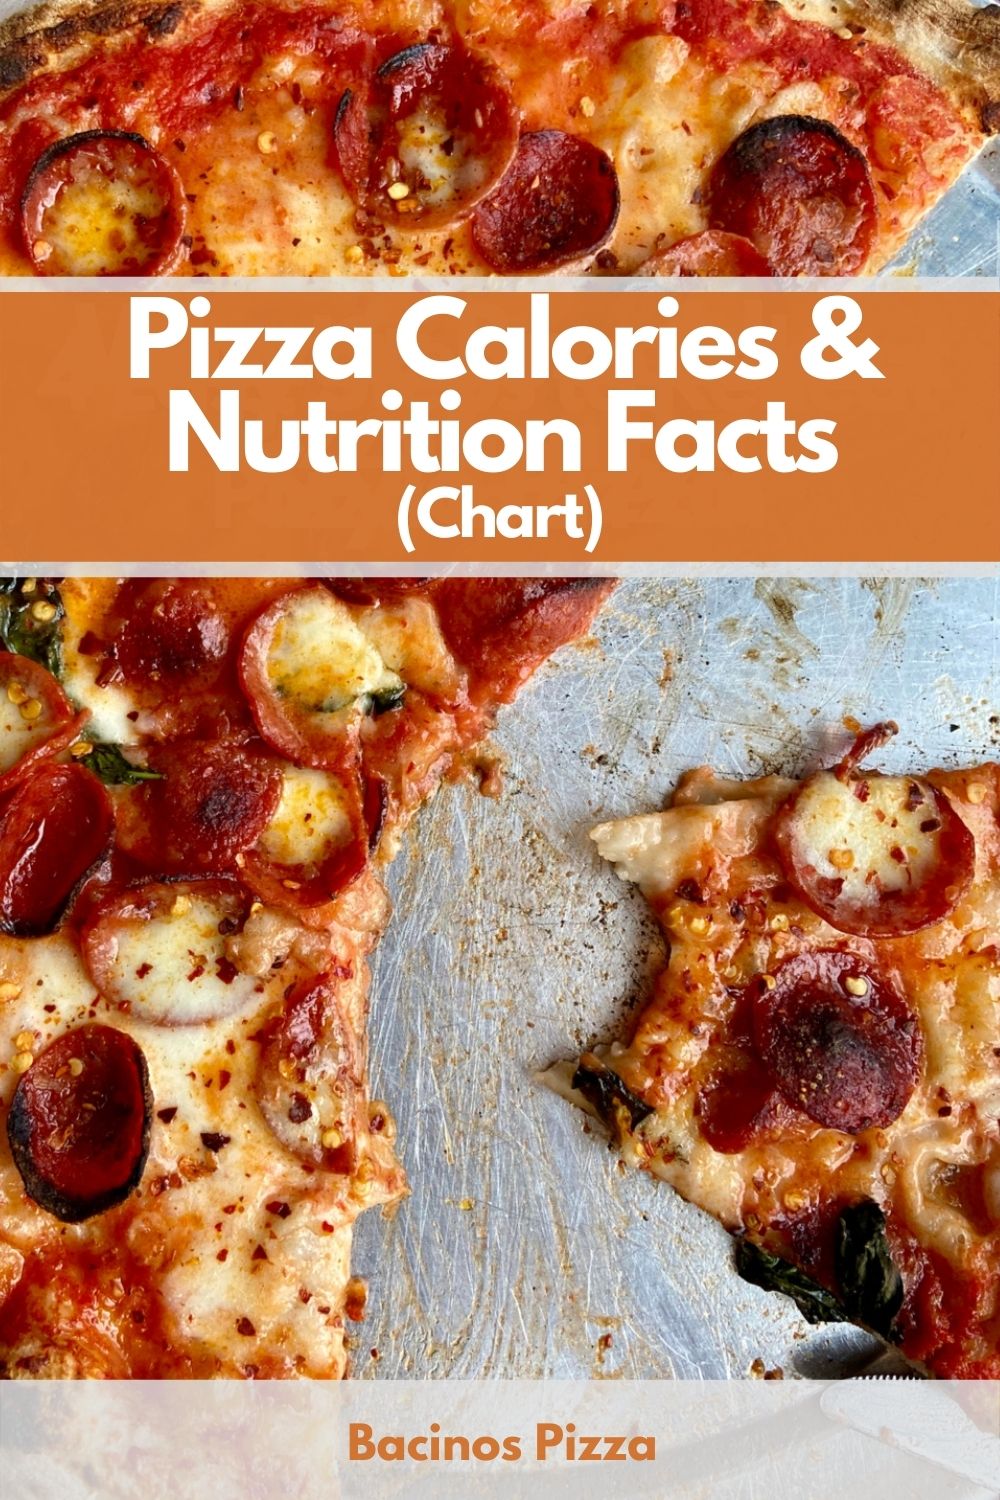 Pizza Calories & Nutrition Facts pin